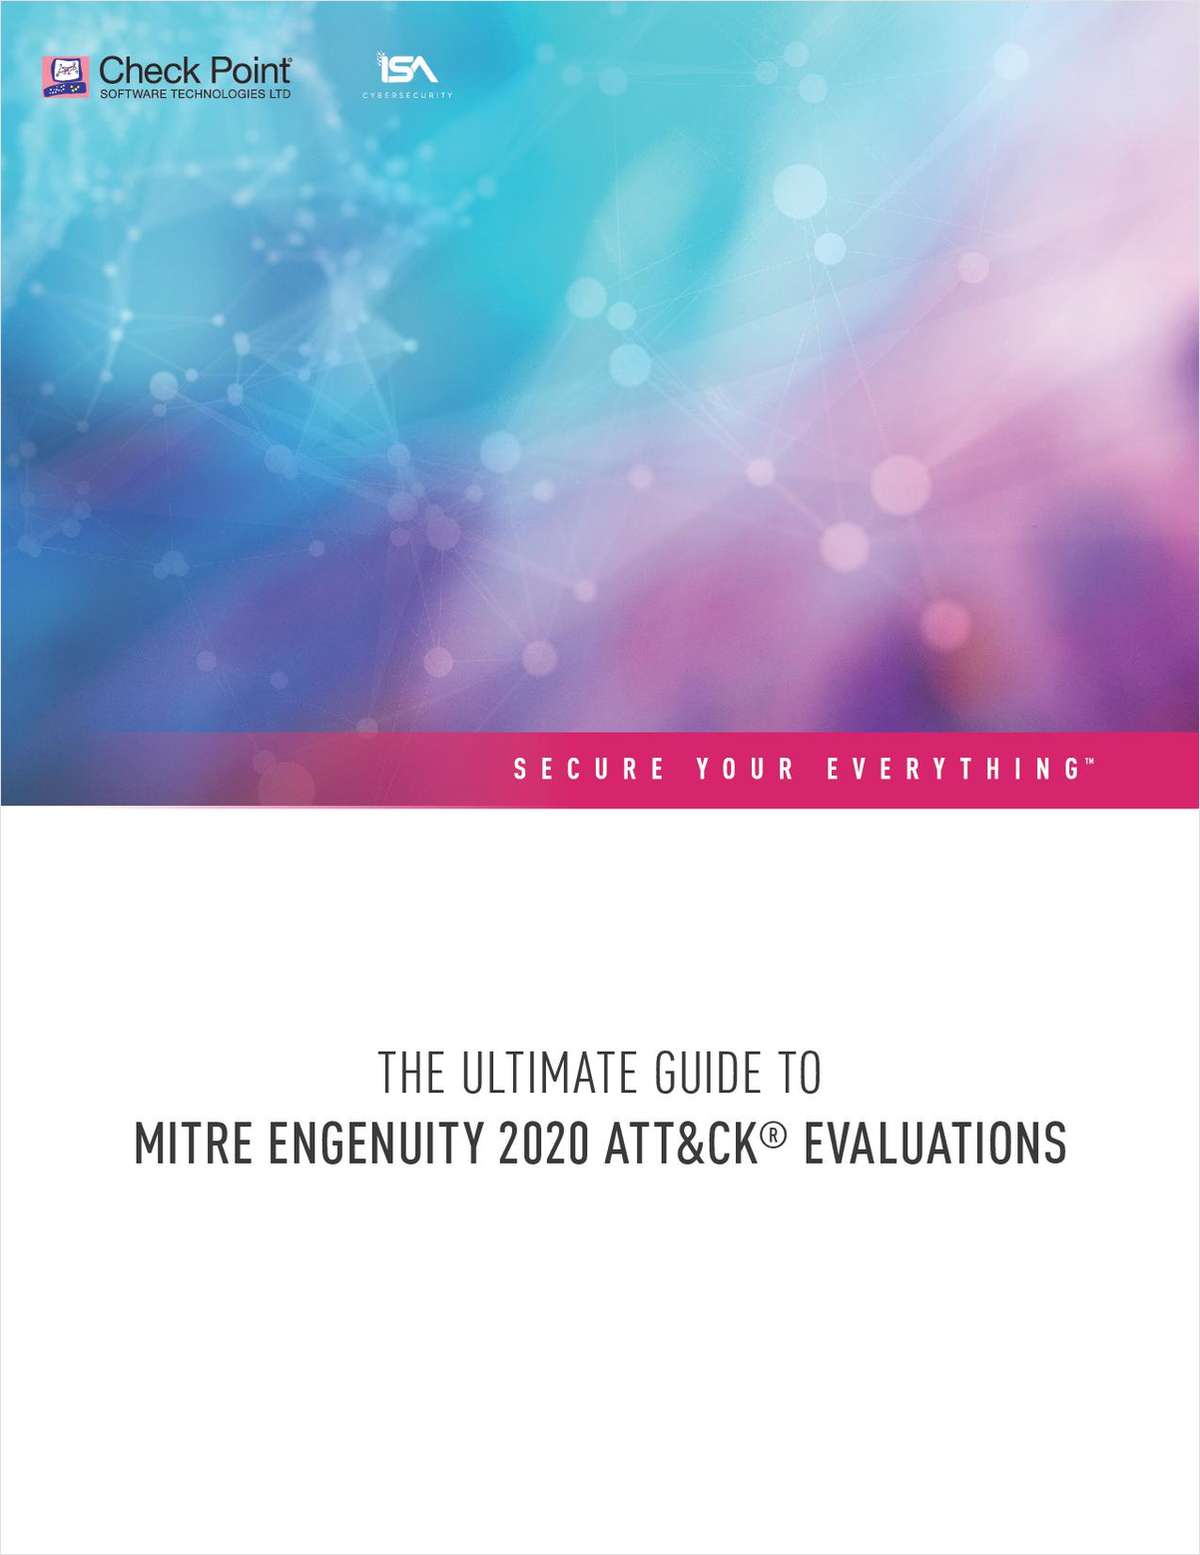 The Ultimate Guide to MITRE Engenuity 2020 ATT&CK Evaluations